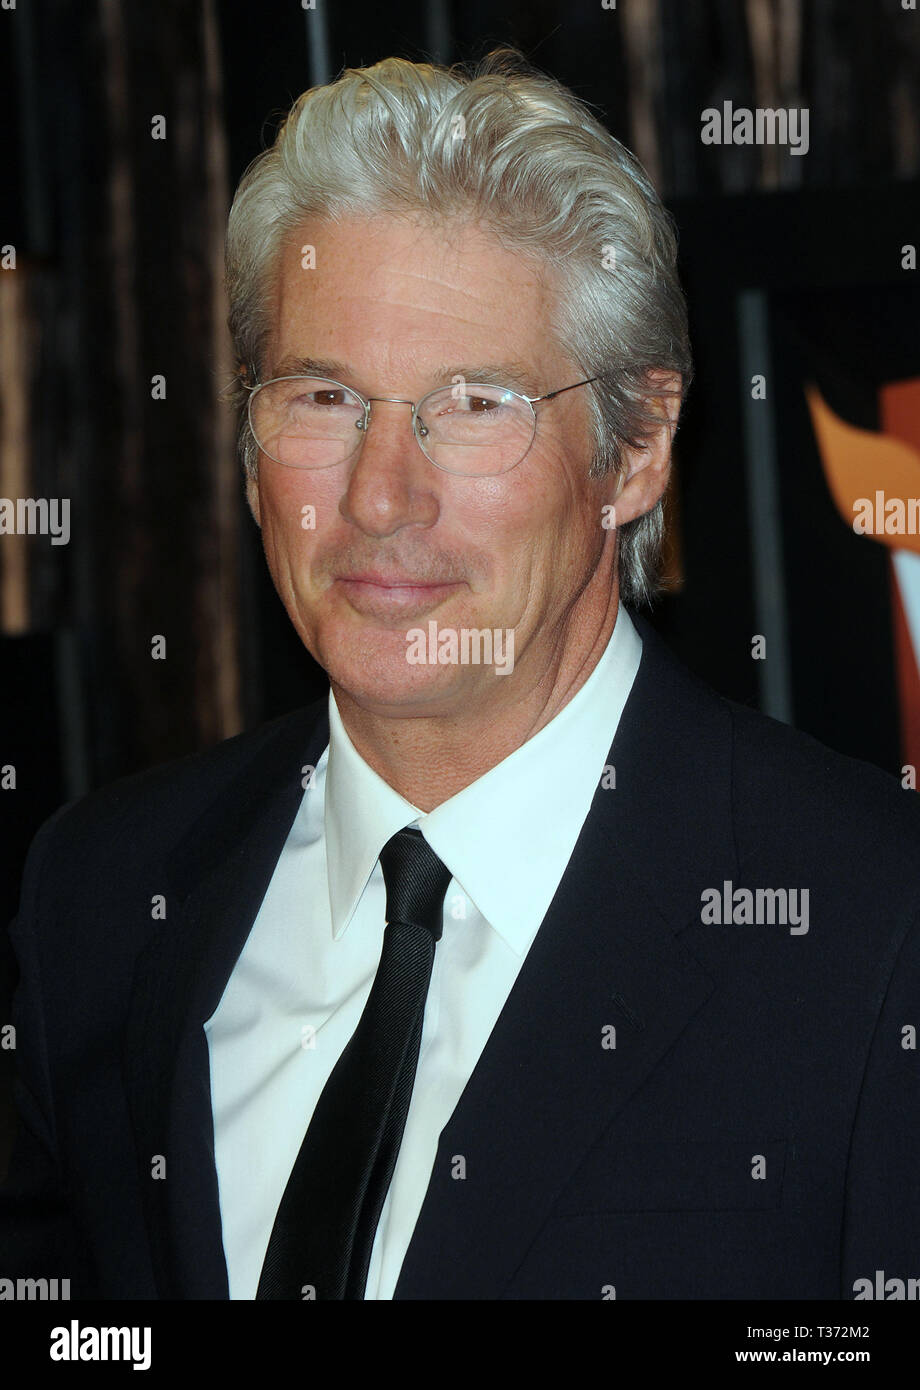 Richard Gere - 14Th annual Critic's Choice Awards at the Santa Monica Civic Center In Los Angeles.GereRichard_62 Red Carpet Event, Vertical, USA, Film Industry, Celebrities,  Photography, Bestof, Arts Culture and Entertainment, Topix Celebrities fashion /  Vertical, Best of, Event in Hollywood Life - California,  Red Carpet and backstage, USA, Film Industry, Celebrities,  movie celebrities, TV celebrities, Music celebrities, Photography, Bestof, Arts Culture and Entertainment,  Topix, headshot, vertical, one person,, from the year , 2009, inquiry tsuni@Gamma-USA.com Stock Photo